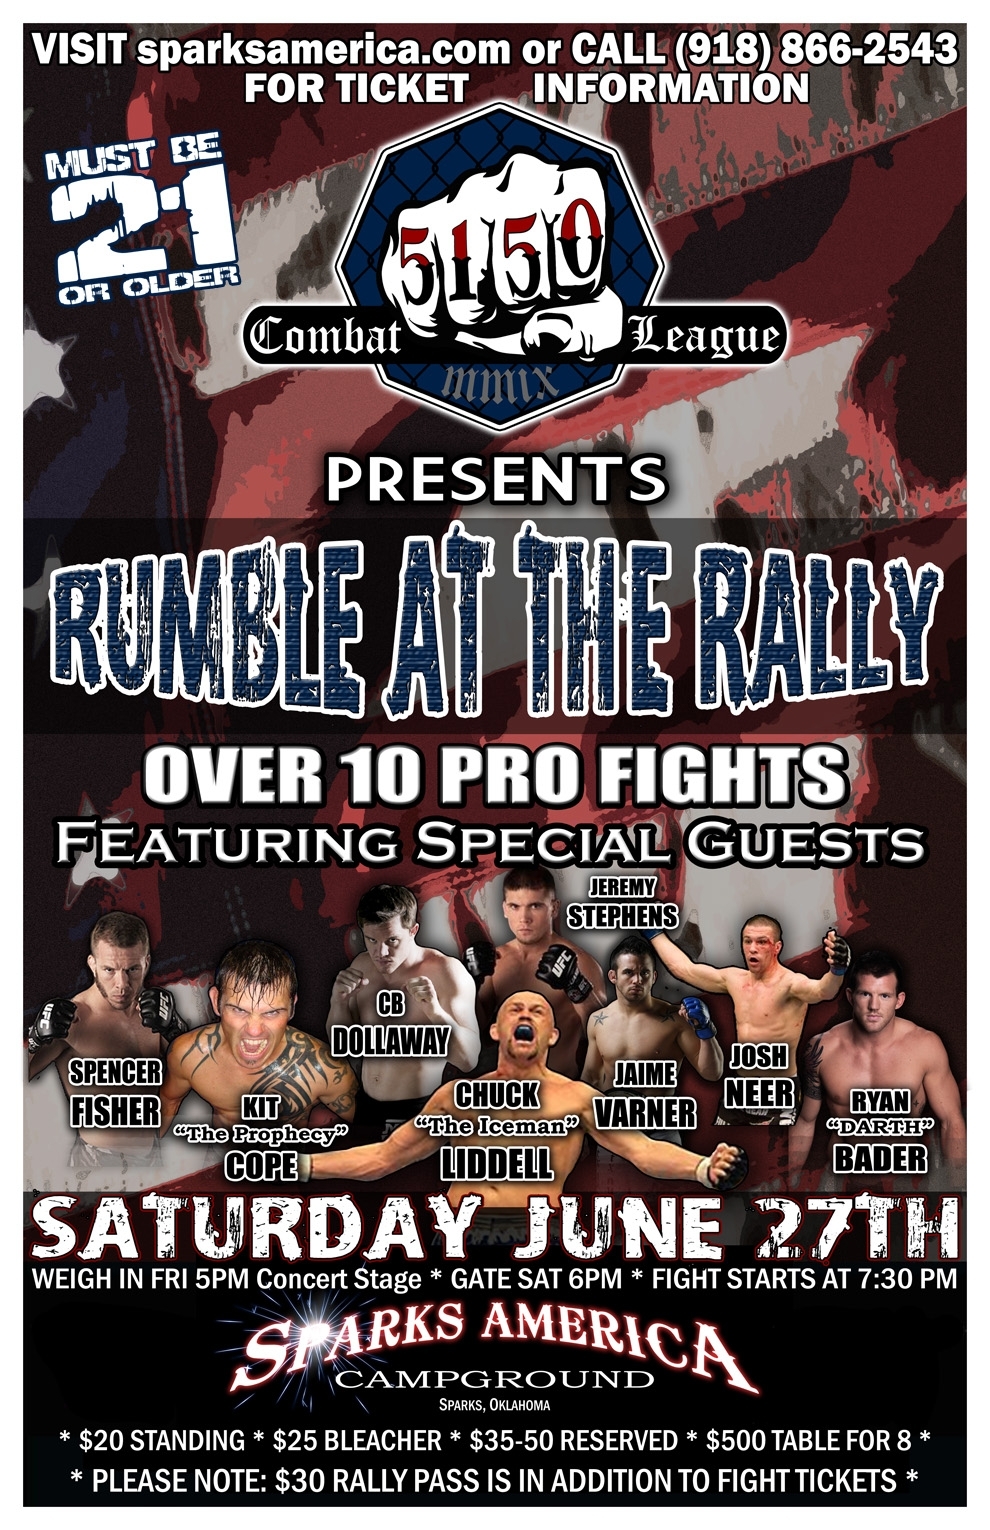 5150 Combat League presents “Rumble at the Rally” June 27 in Sparks